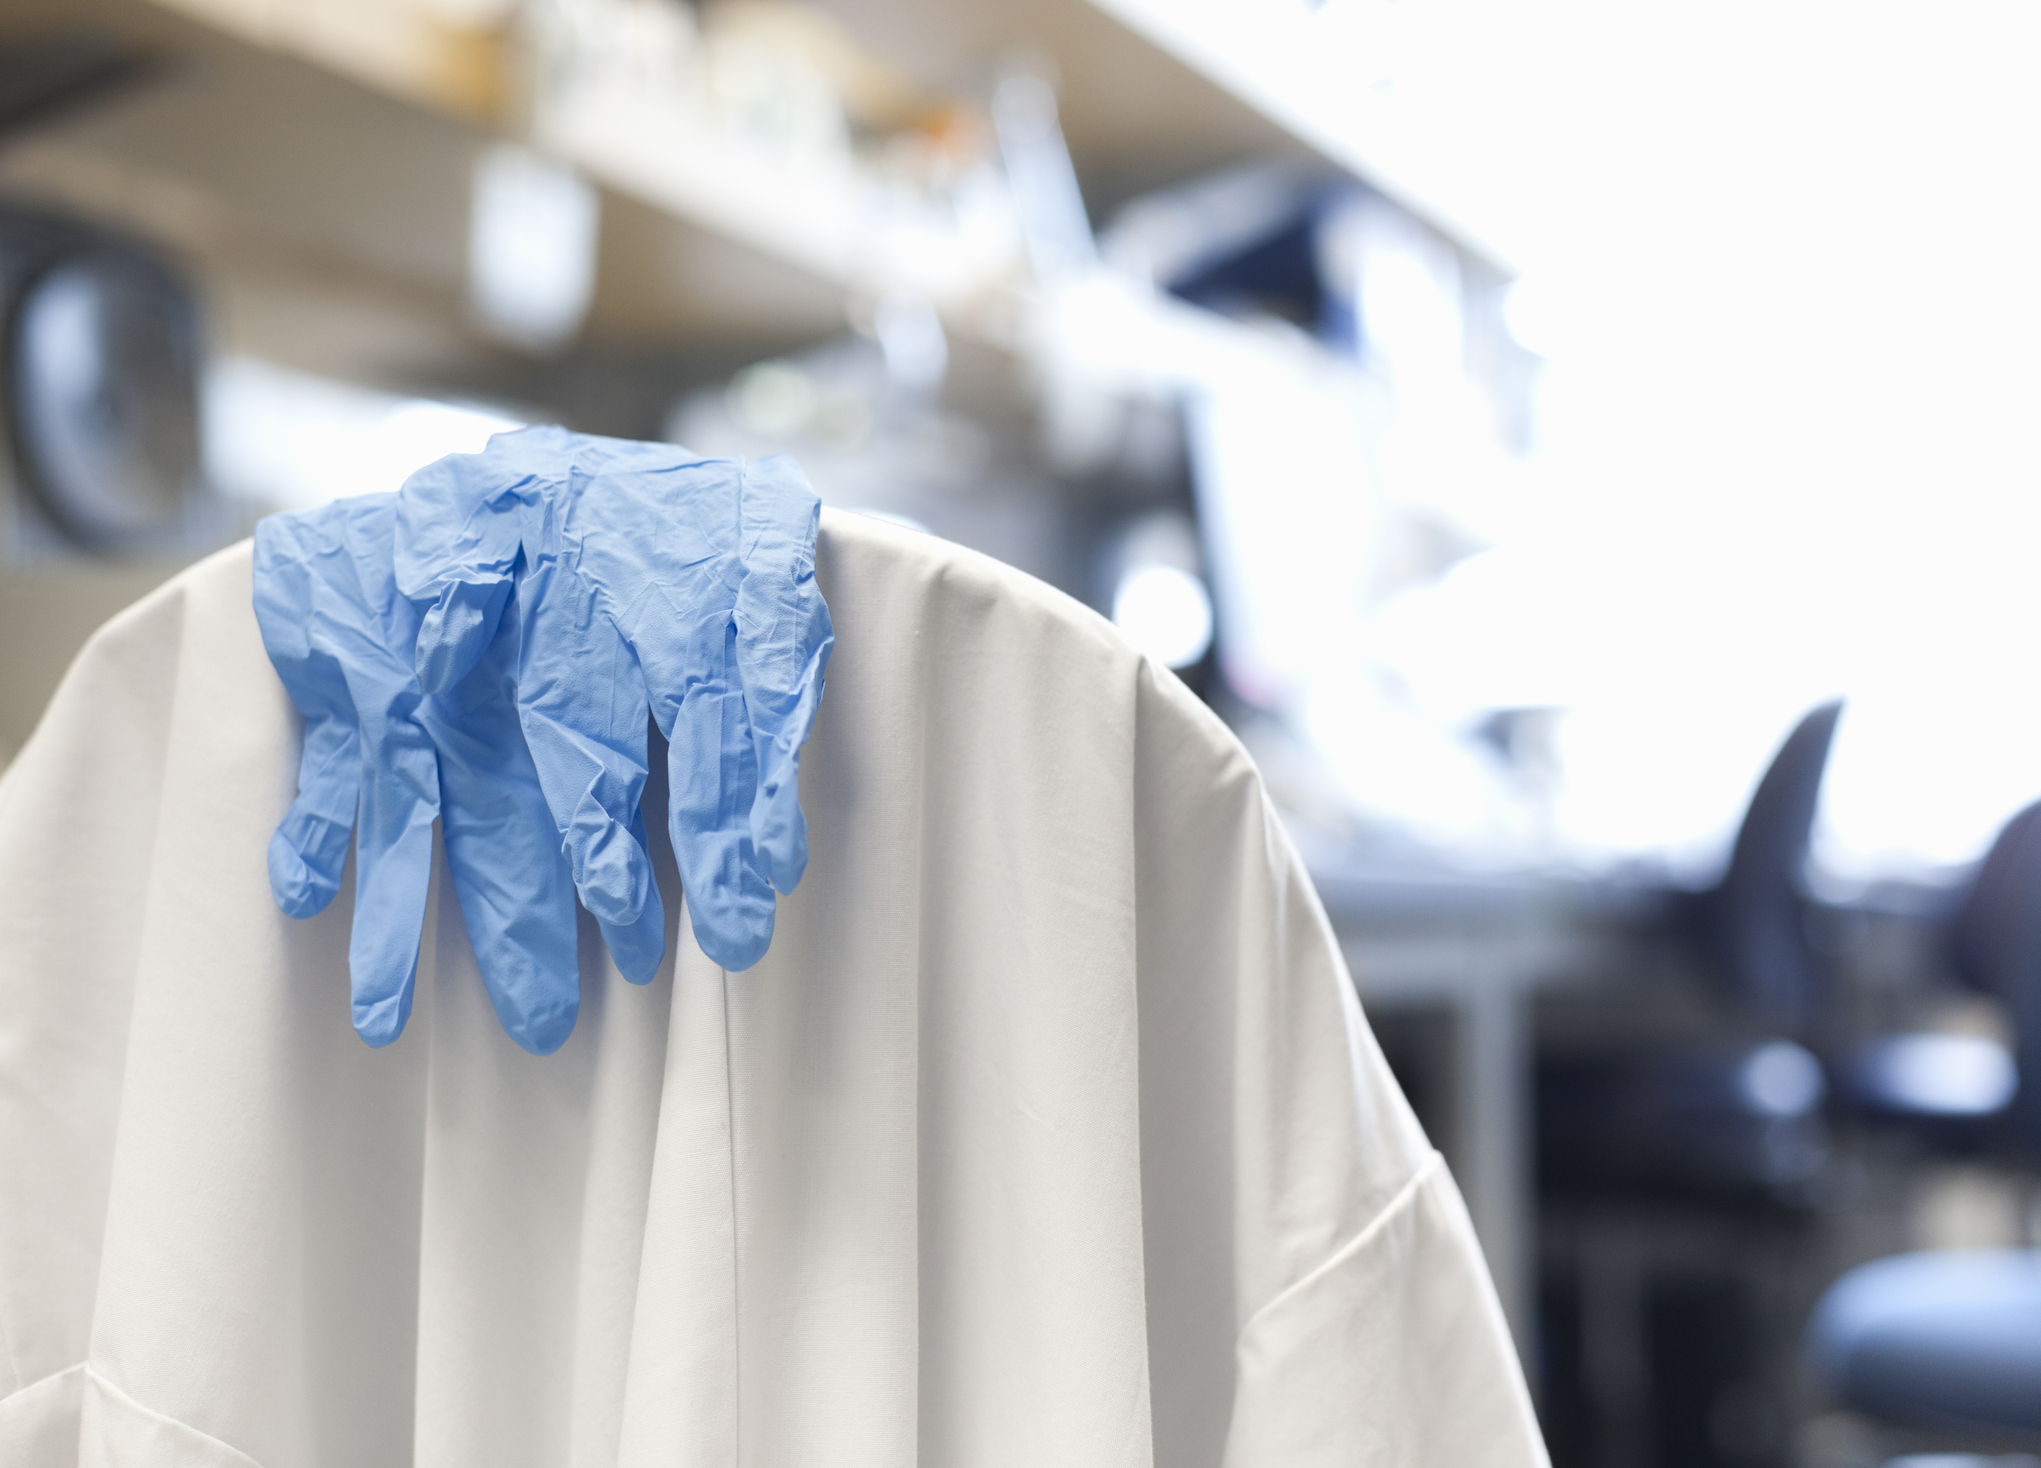 Scientist's gloves and lab coat